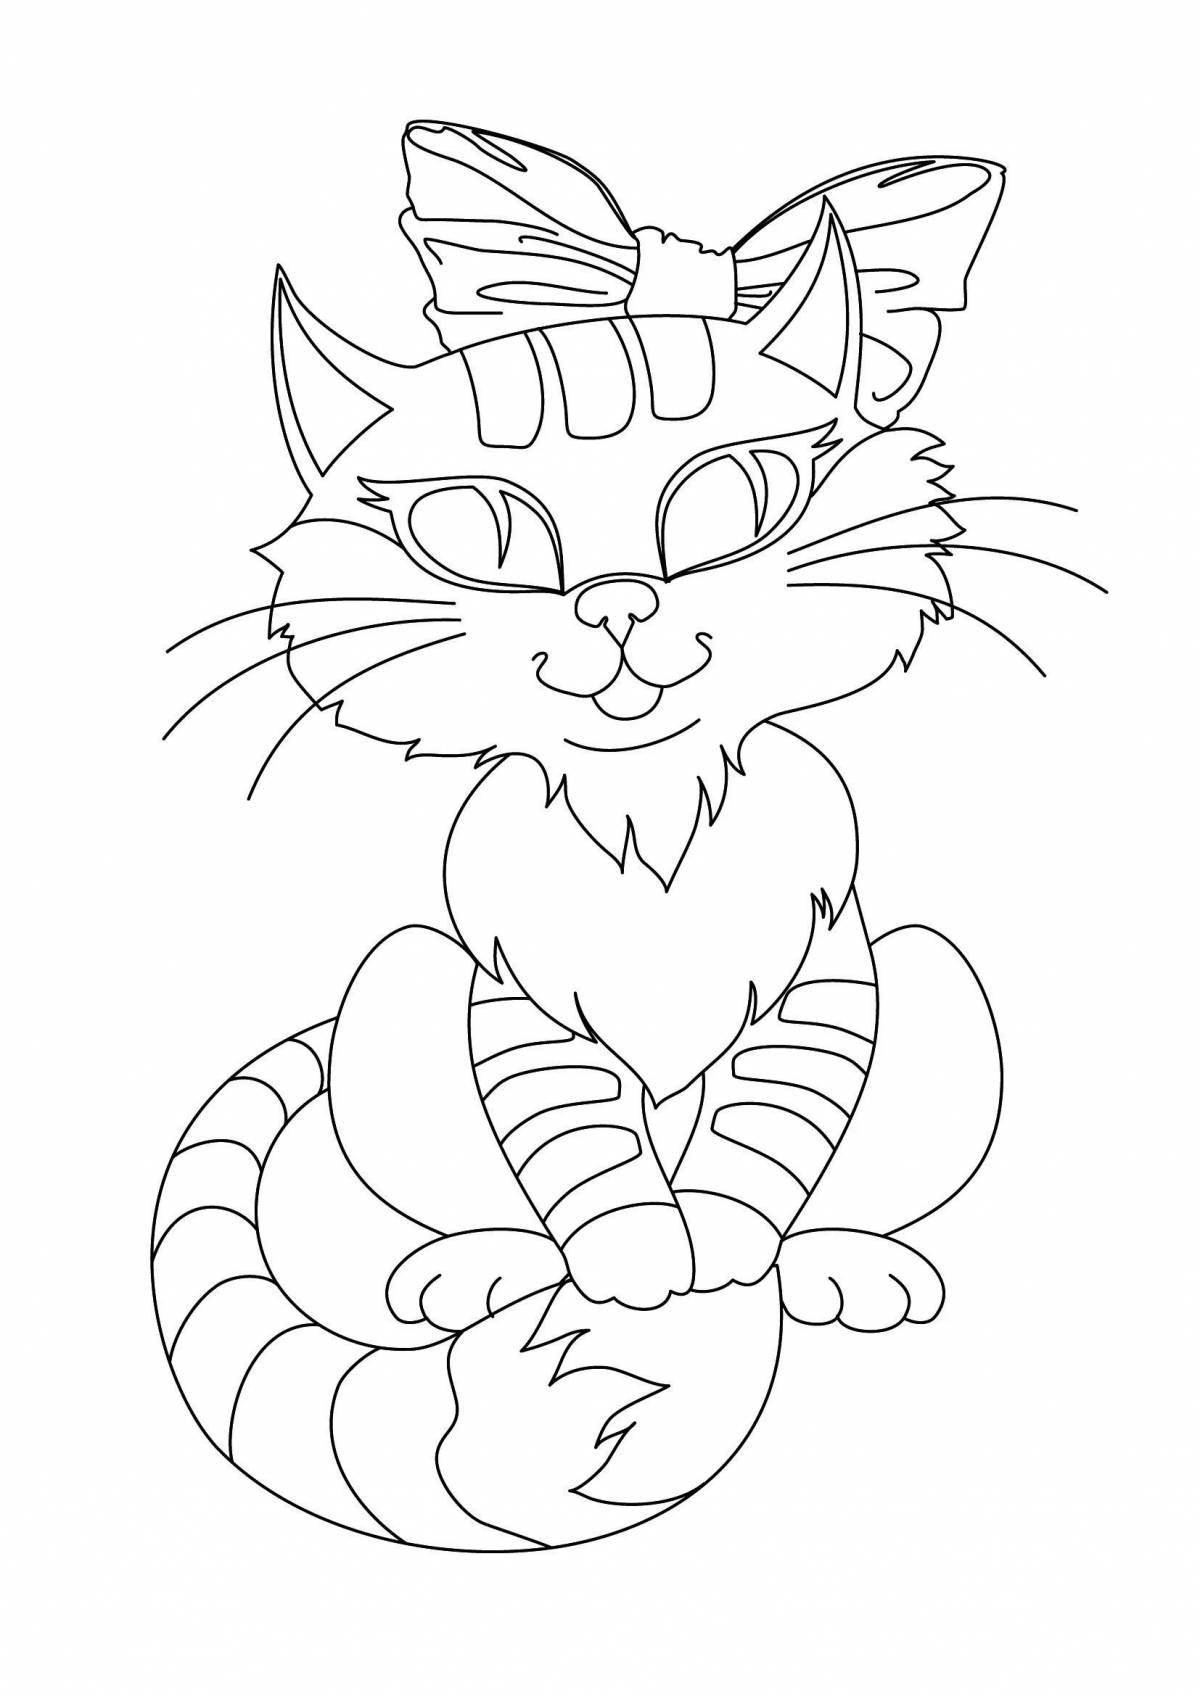 Color-explosion stuffed animal coloring page